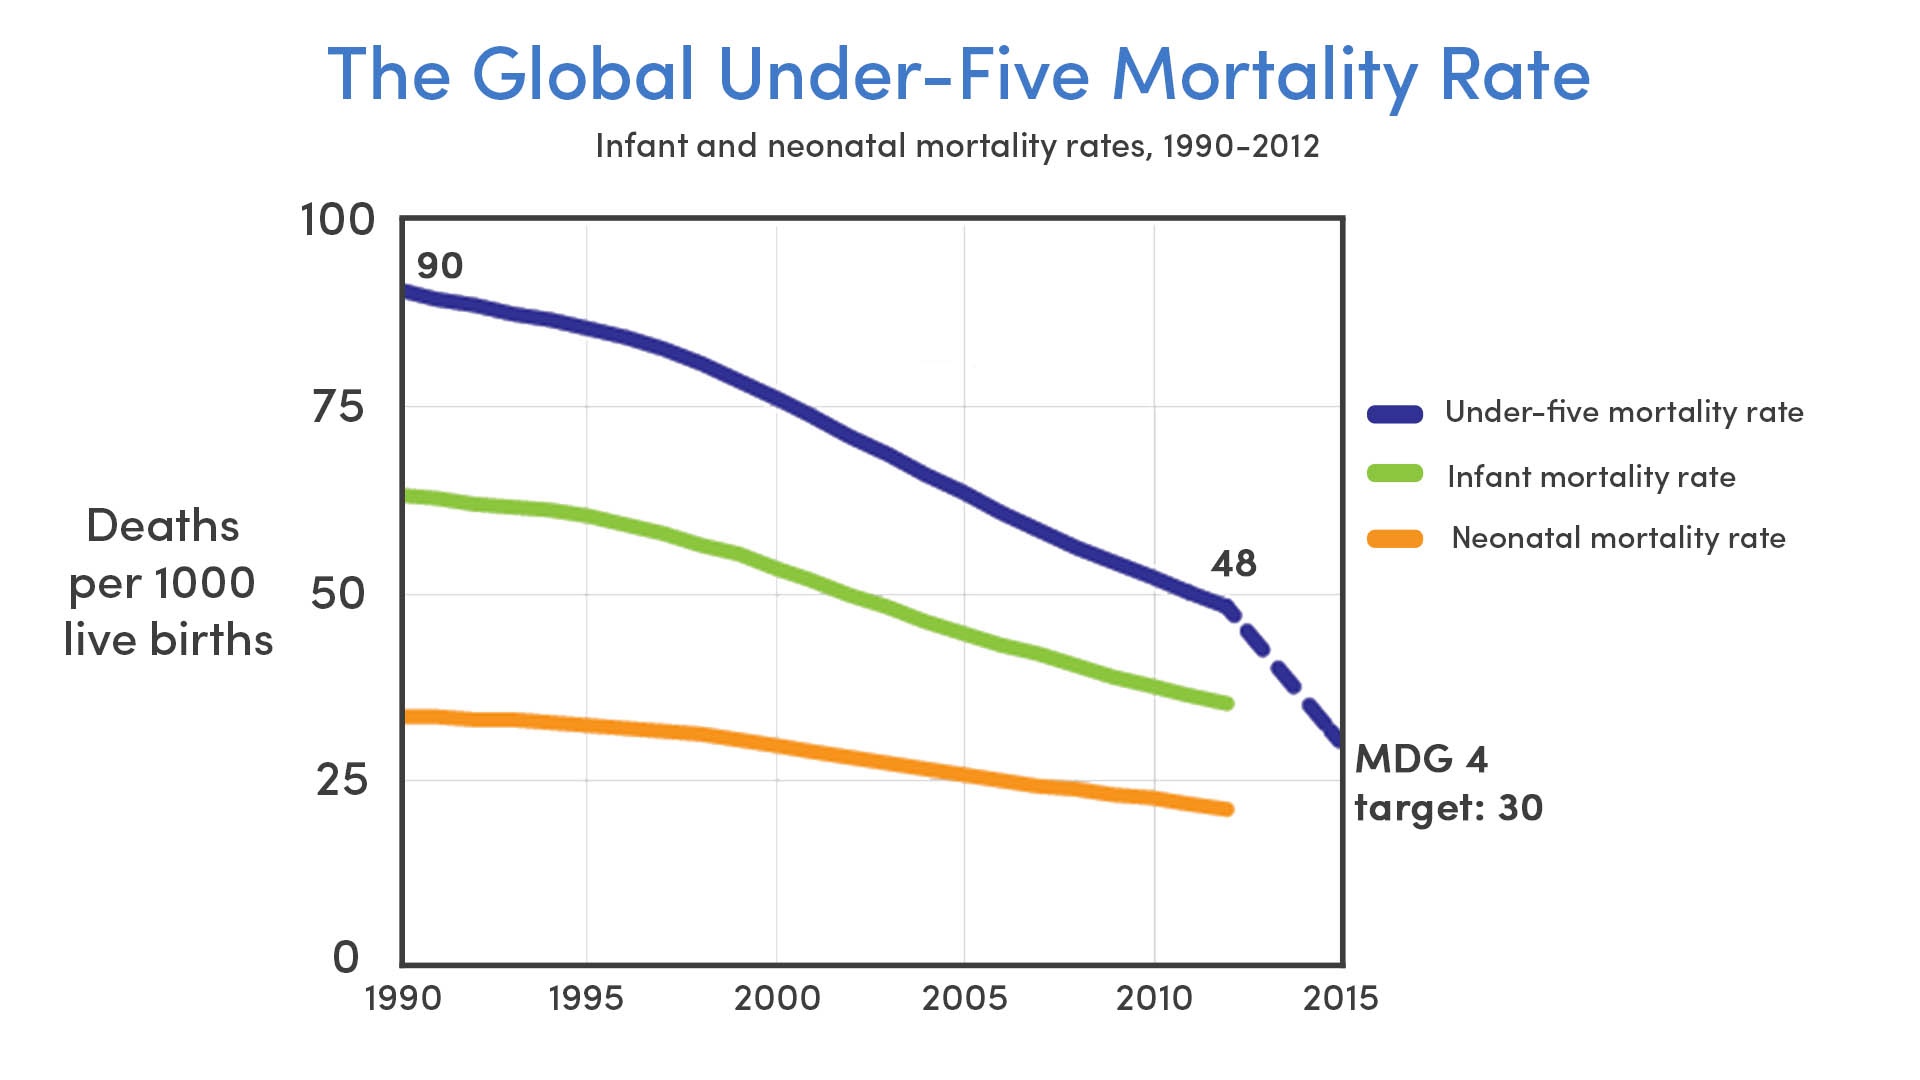 Infant Mortality Rate